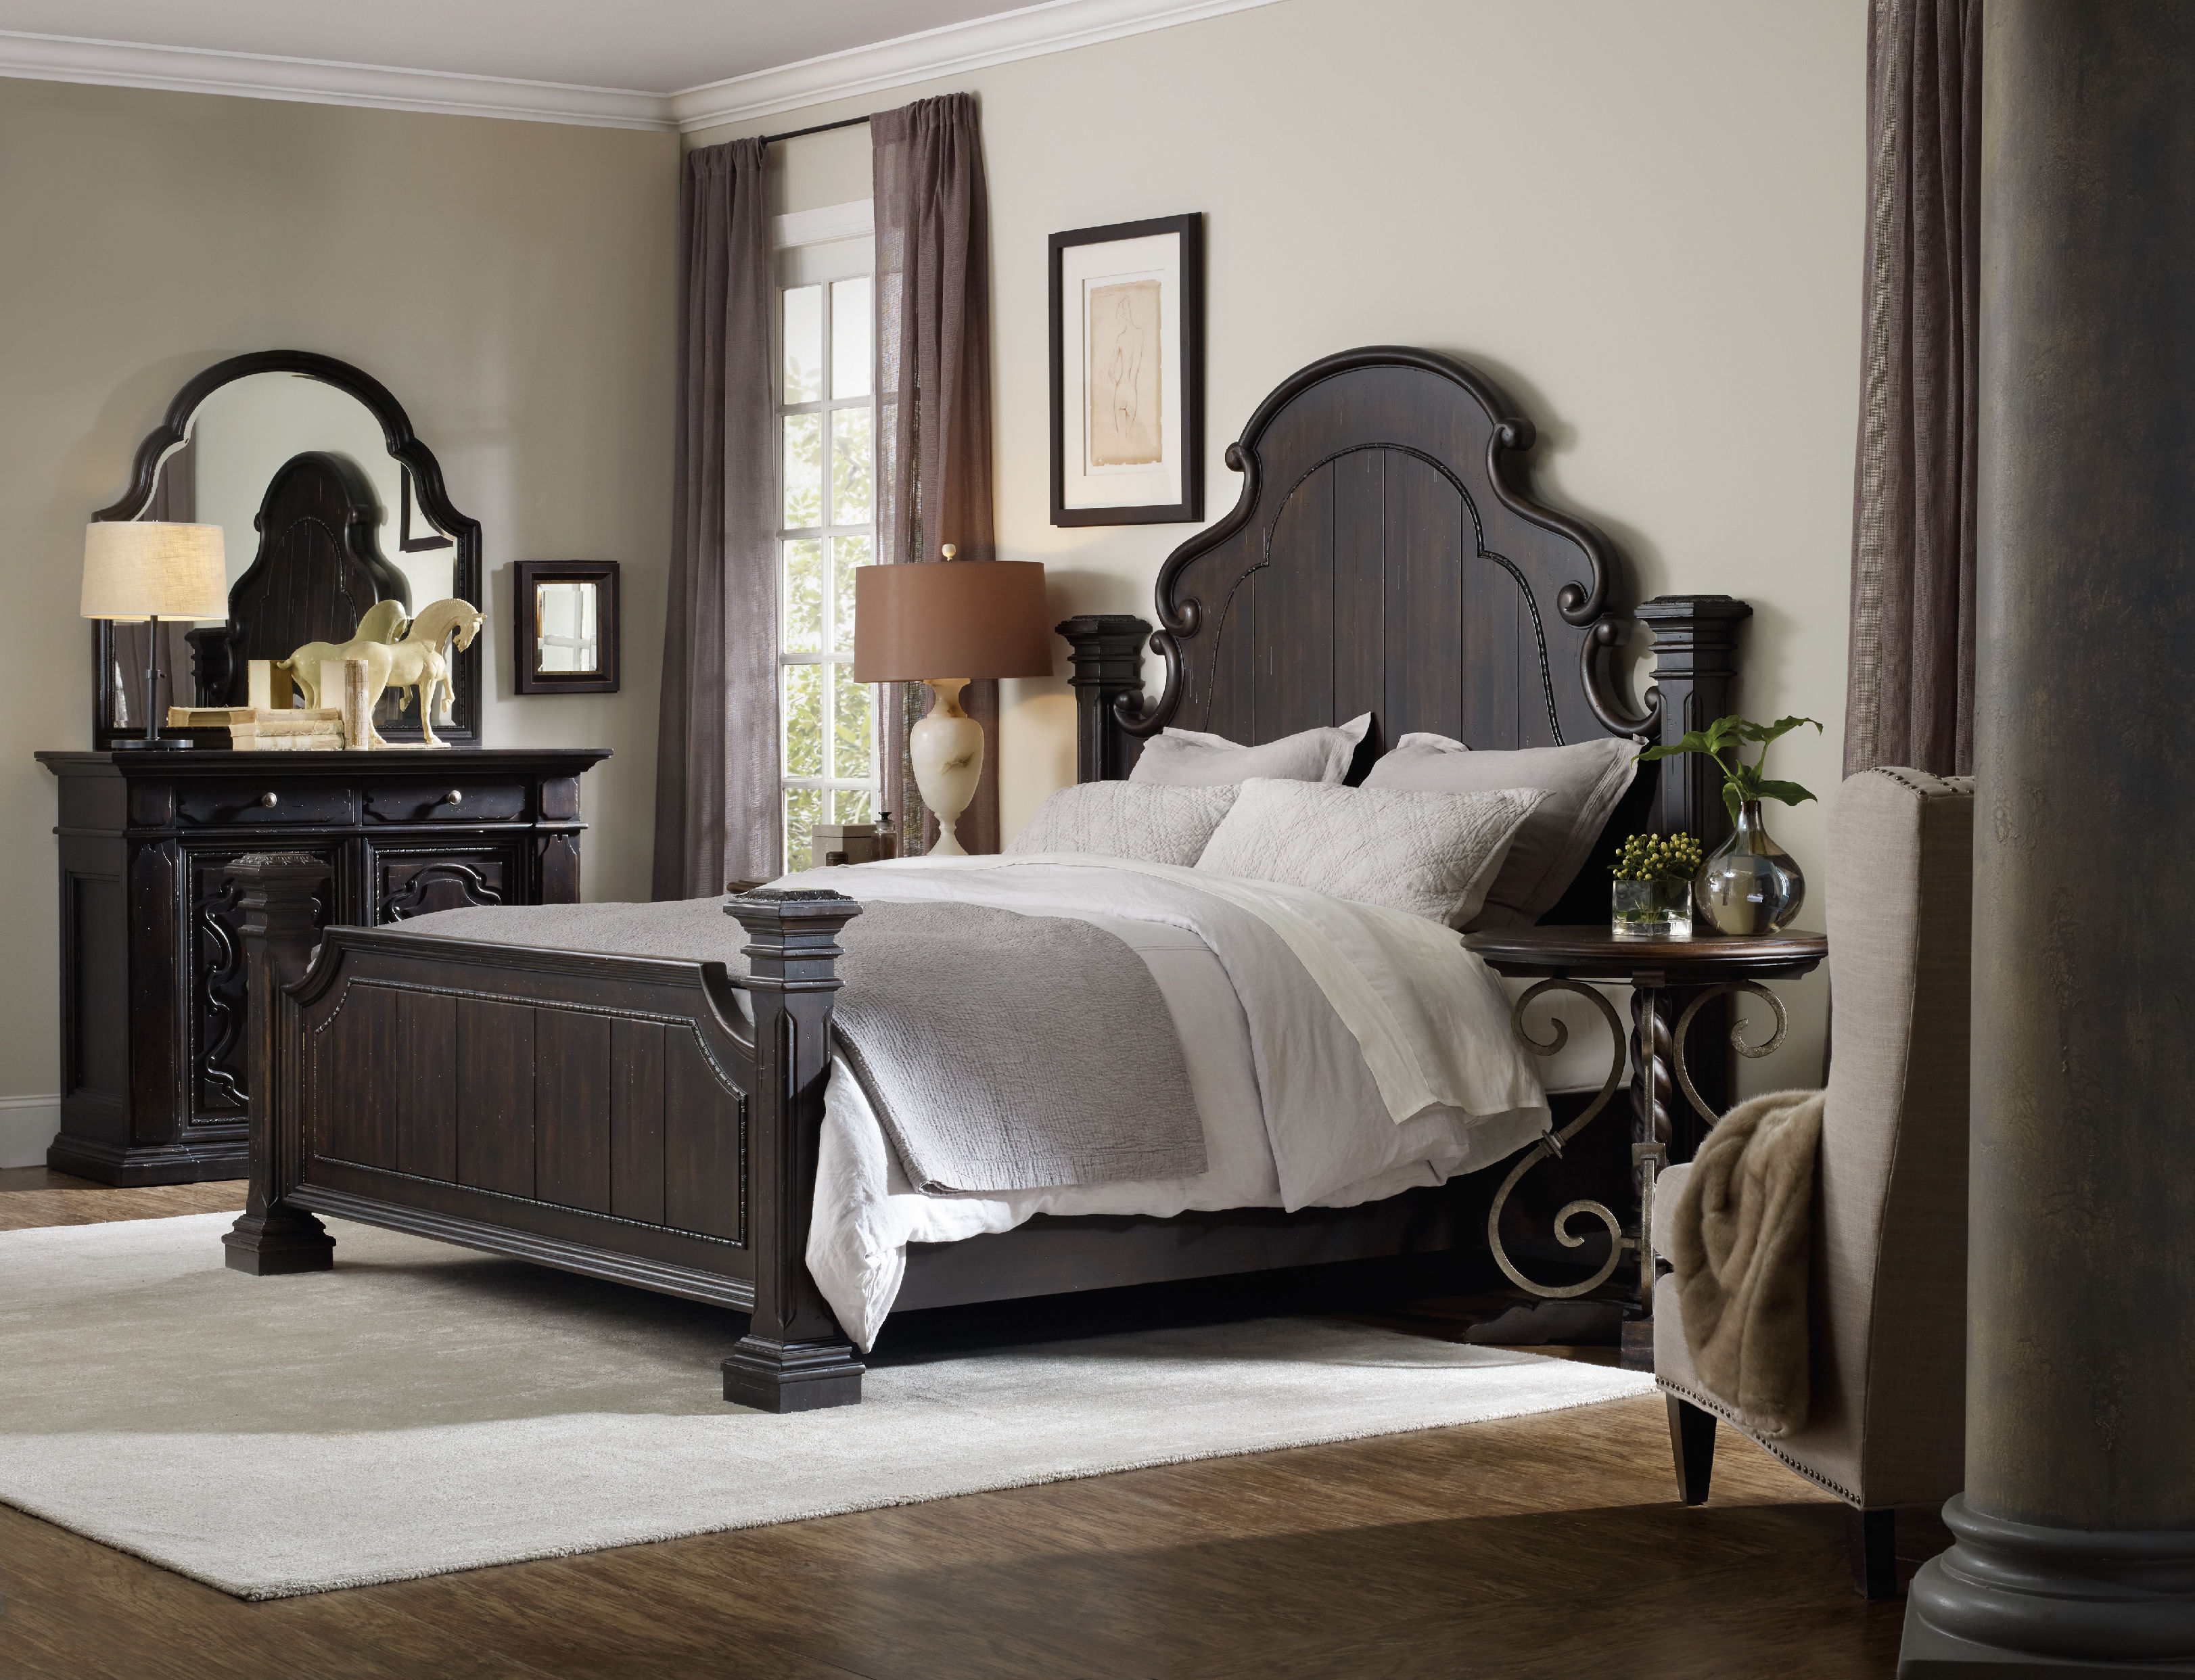 treviso painted bedroom furniture